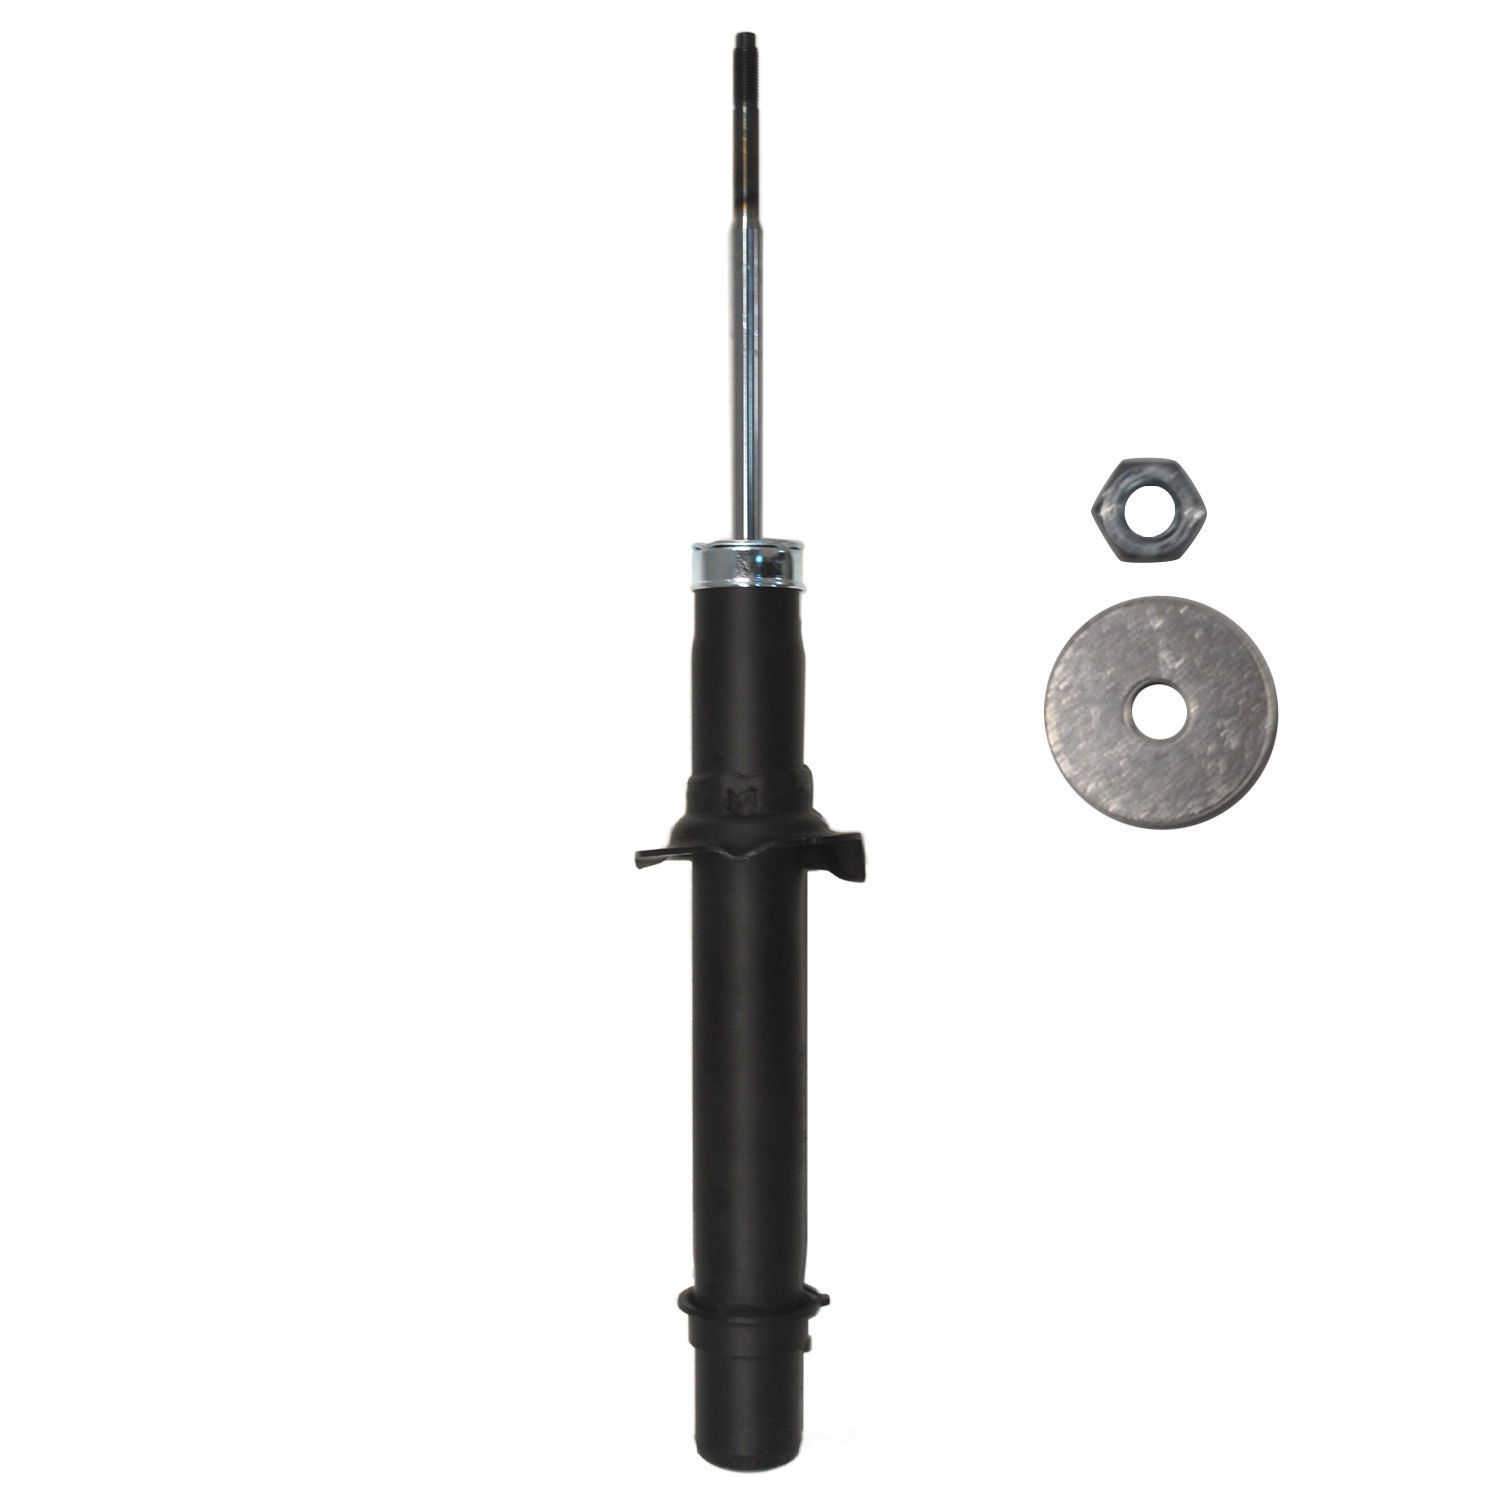 PERFORMANCE RIDE TECHNOLOGY BY ADD - Suspension Strut Assembly - P6T 477213